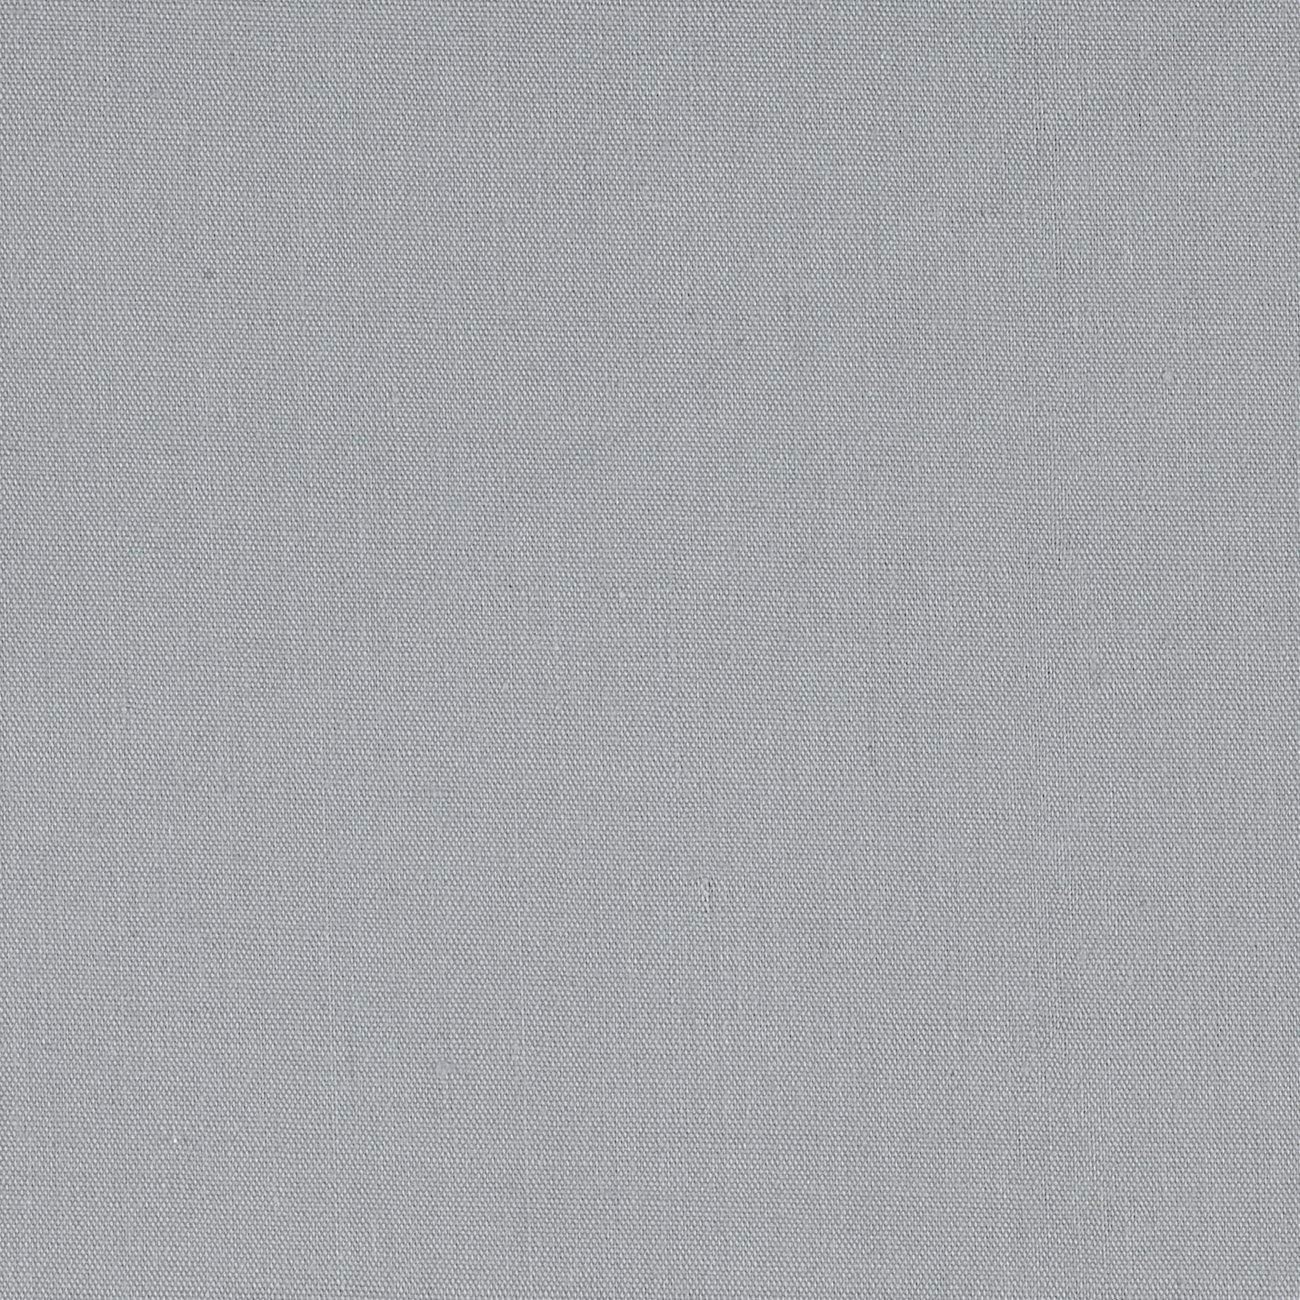 Premium Light Weight Poly Cotton Blend Broadcloth Fabric, Good to Make Face Mask Fabric (Silver, 1 Yard)